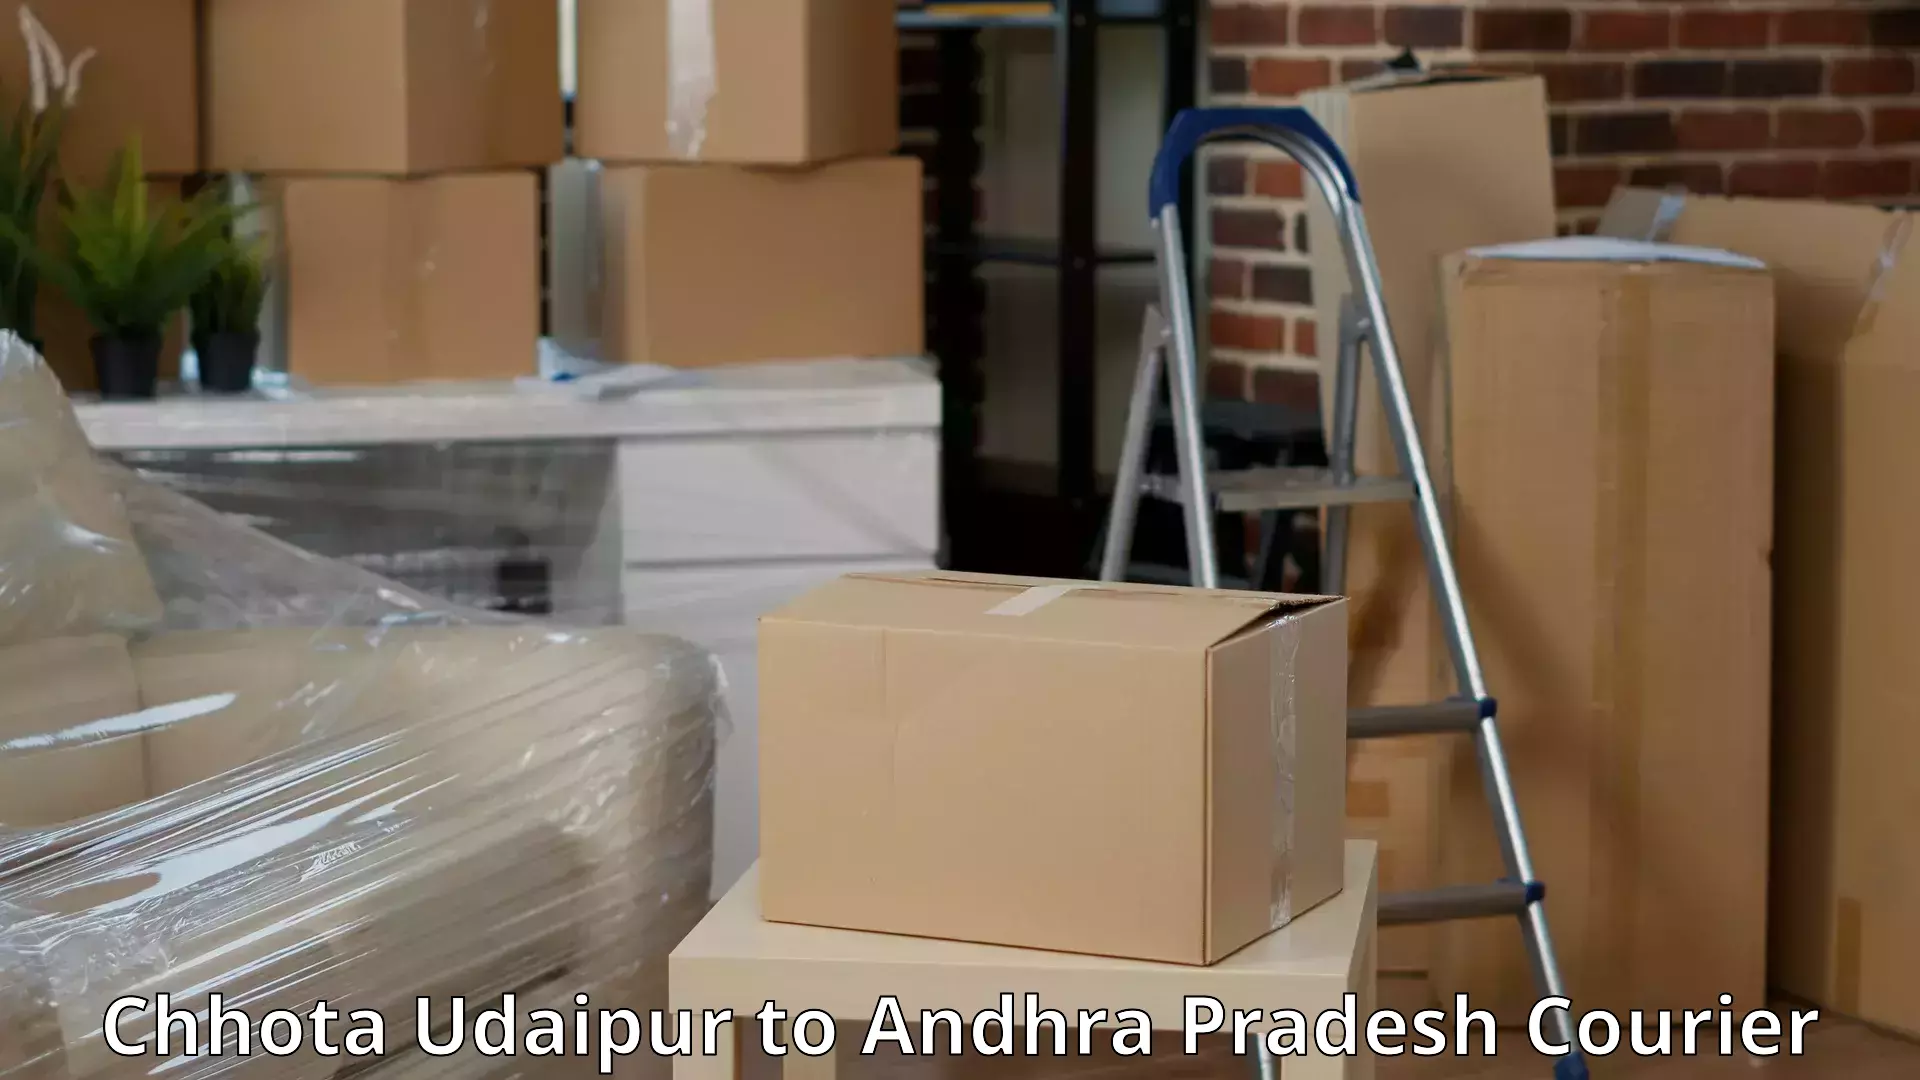 Furniture transport solutions Chhota Udaipur to Kuppam